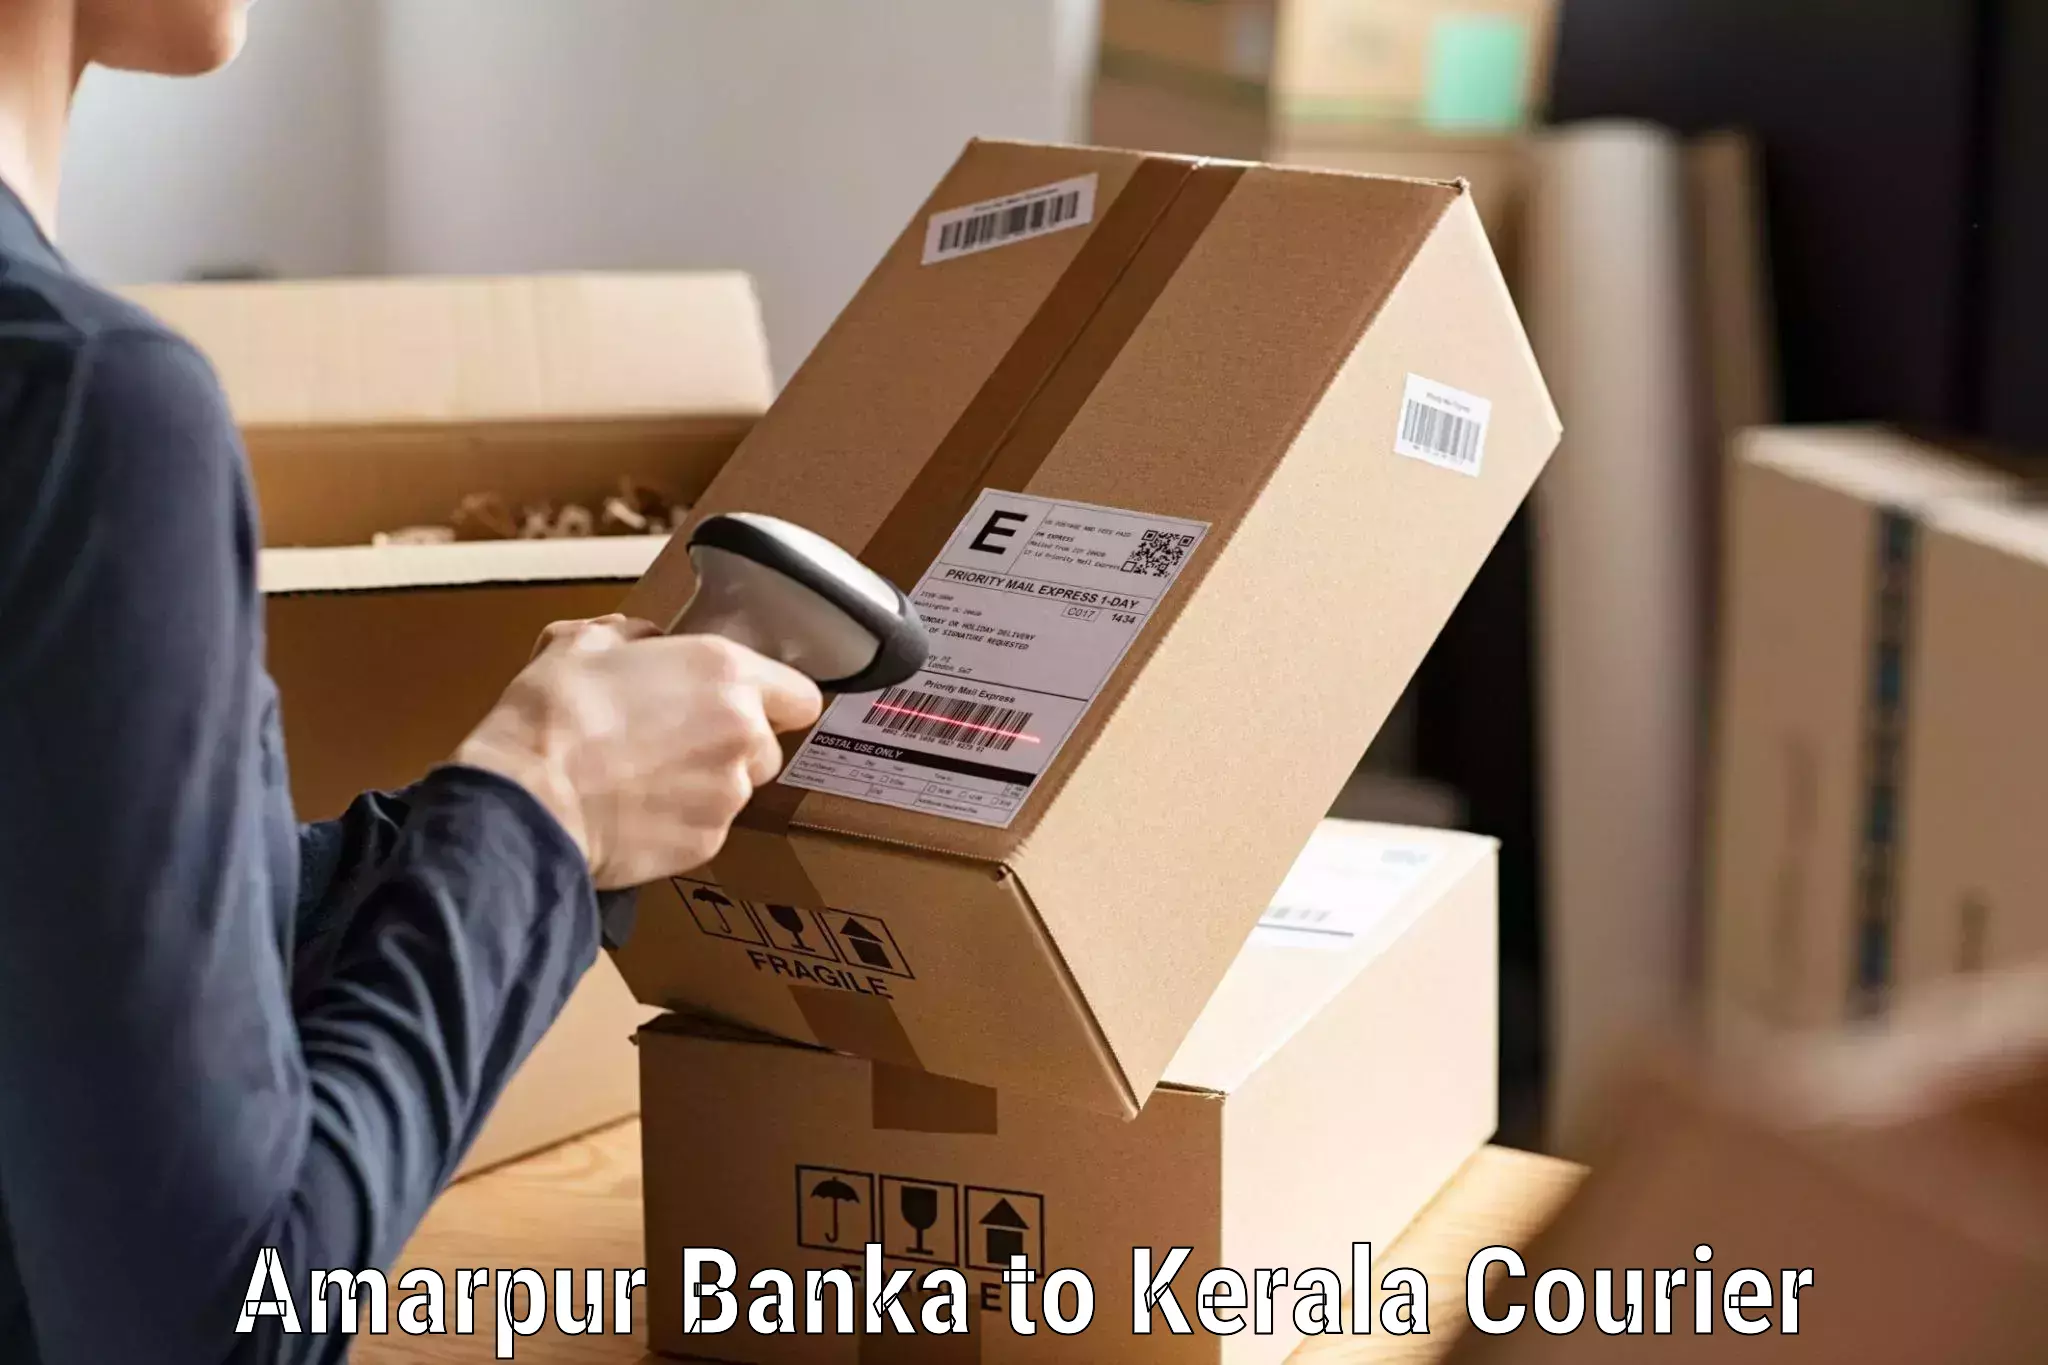 Professional courier services Amarpur Banka to Parappa